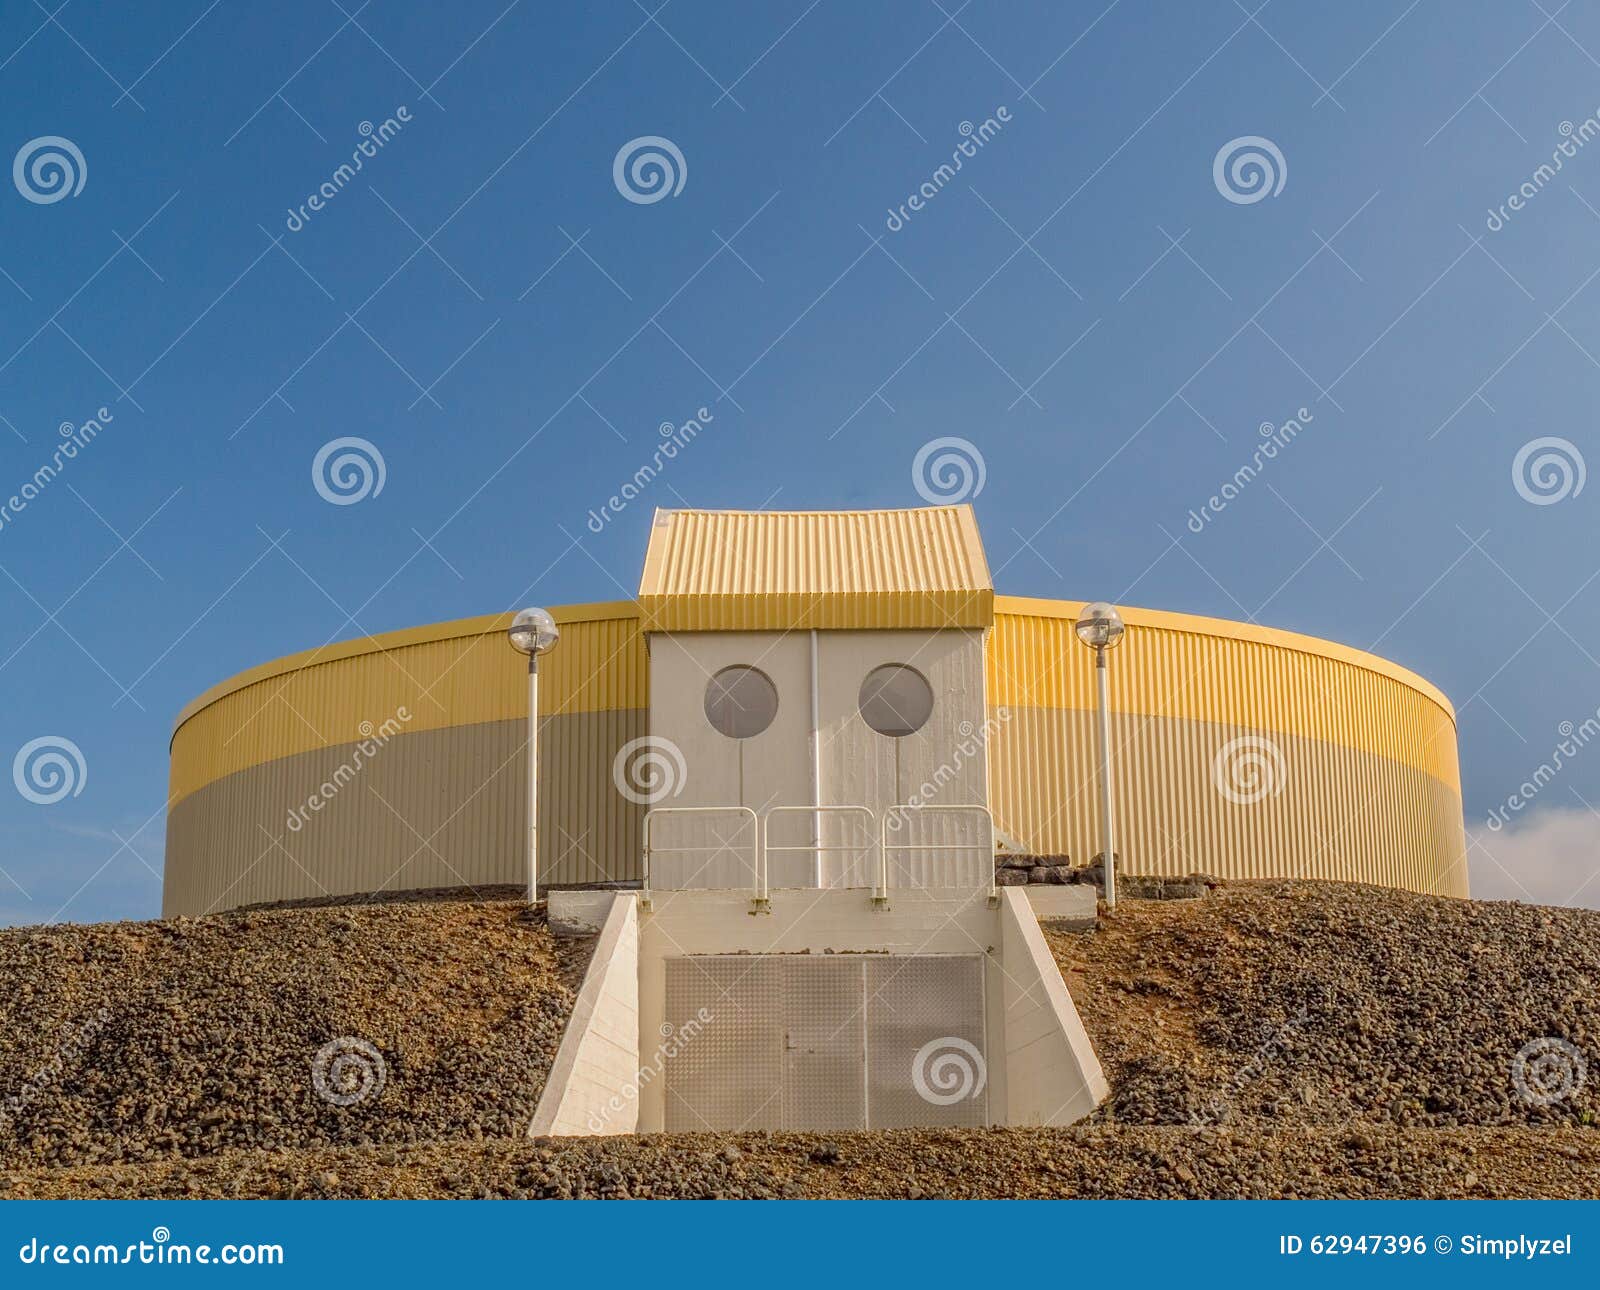 Round Building Iceland stock photo. Image of bright, stripes - 62947396